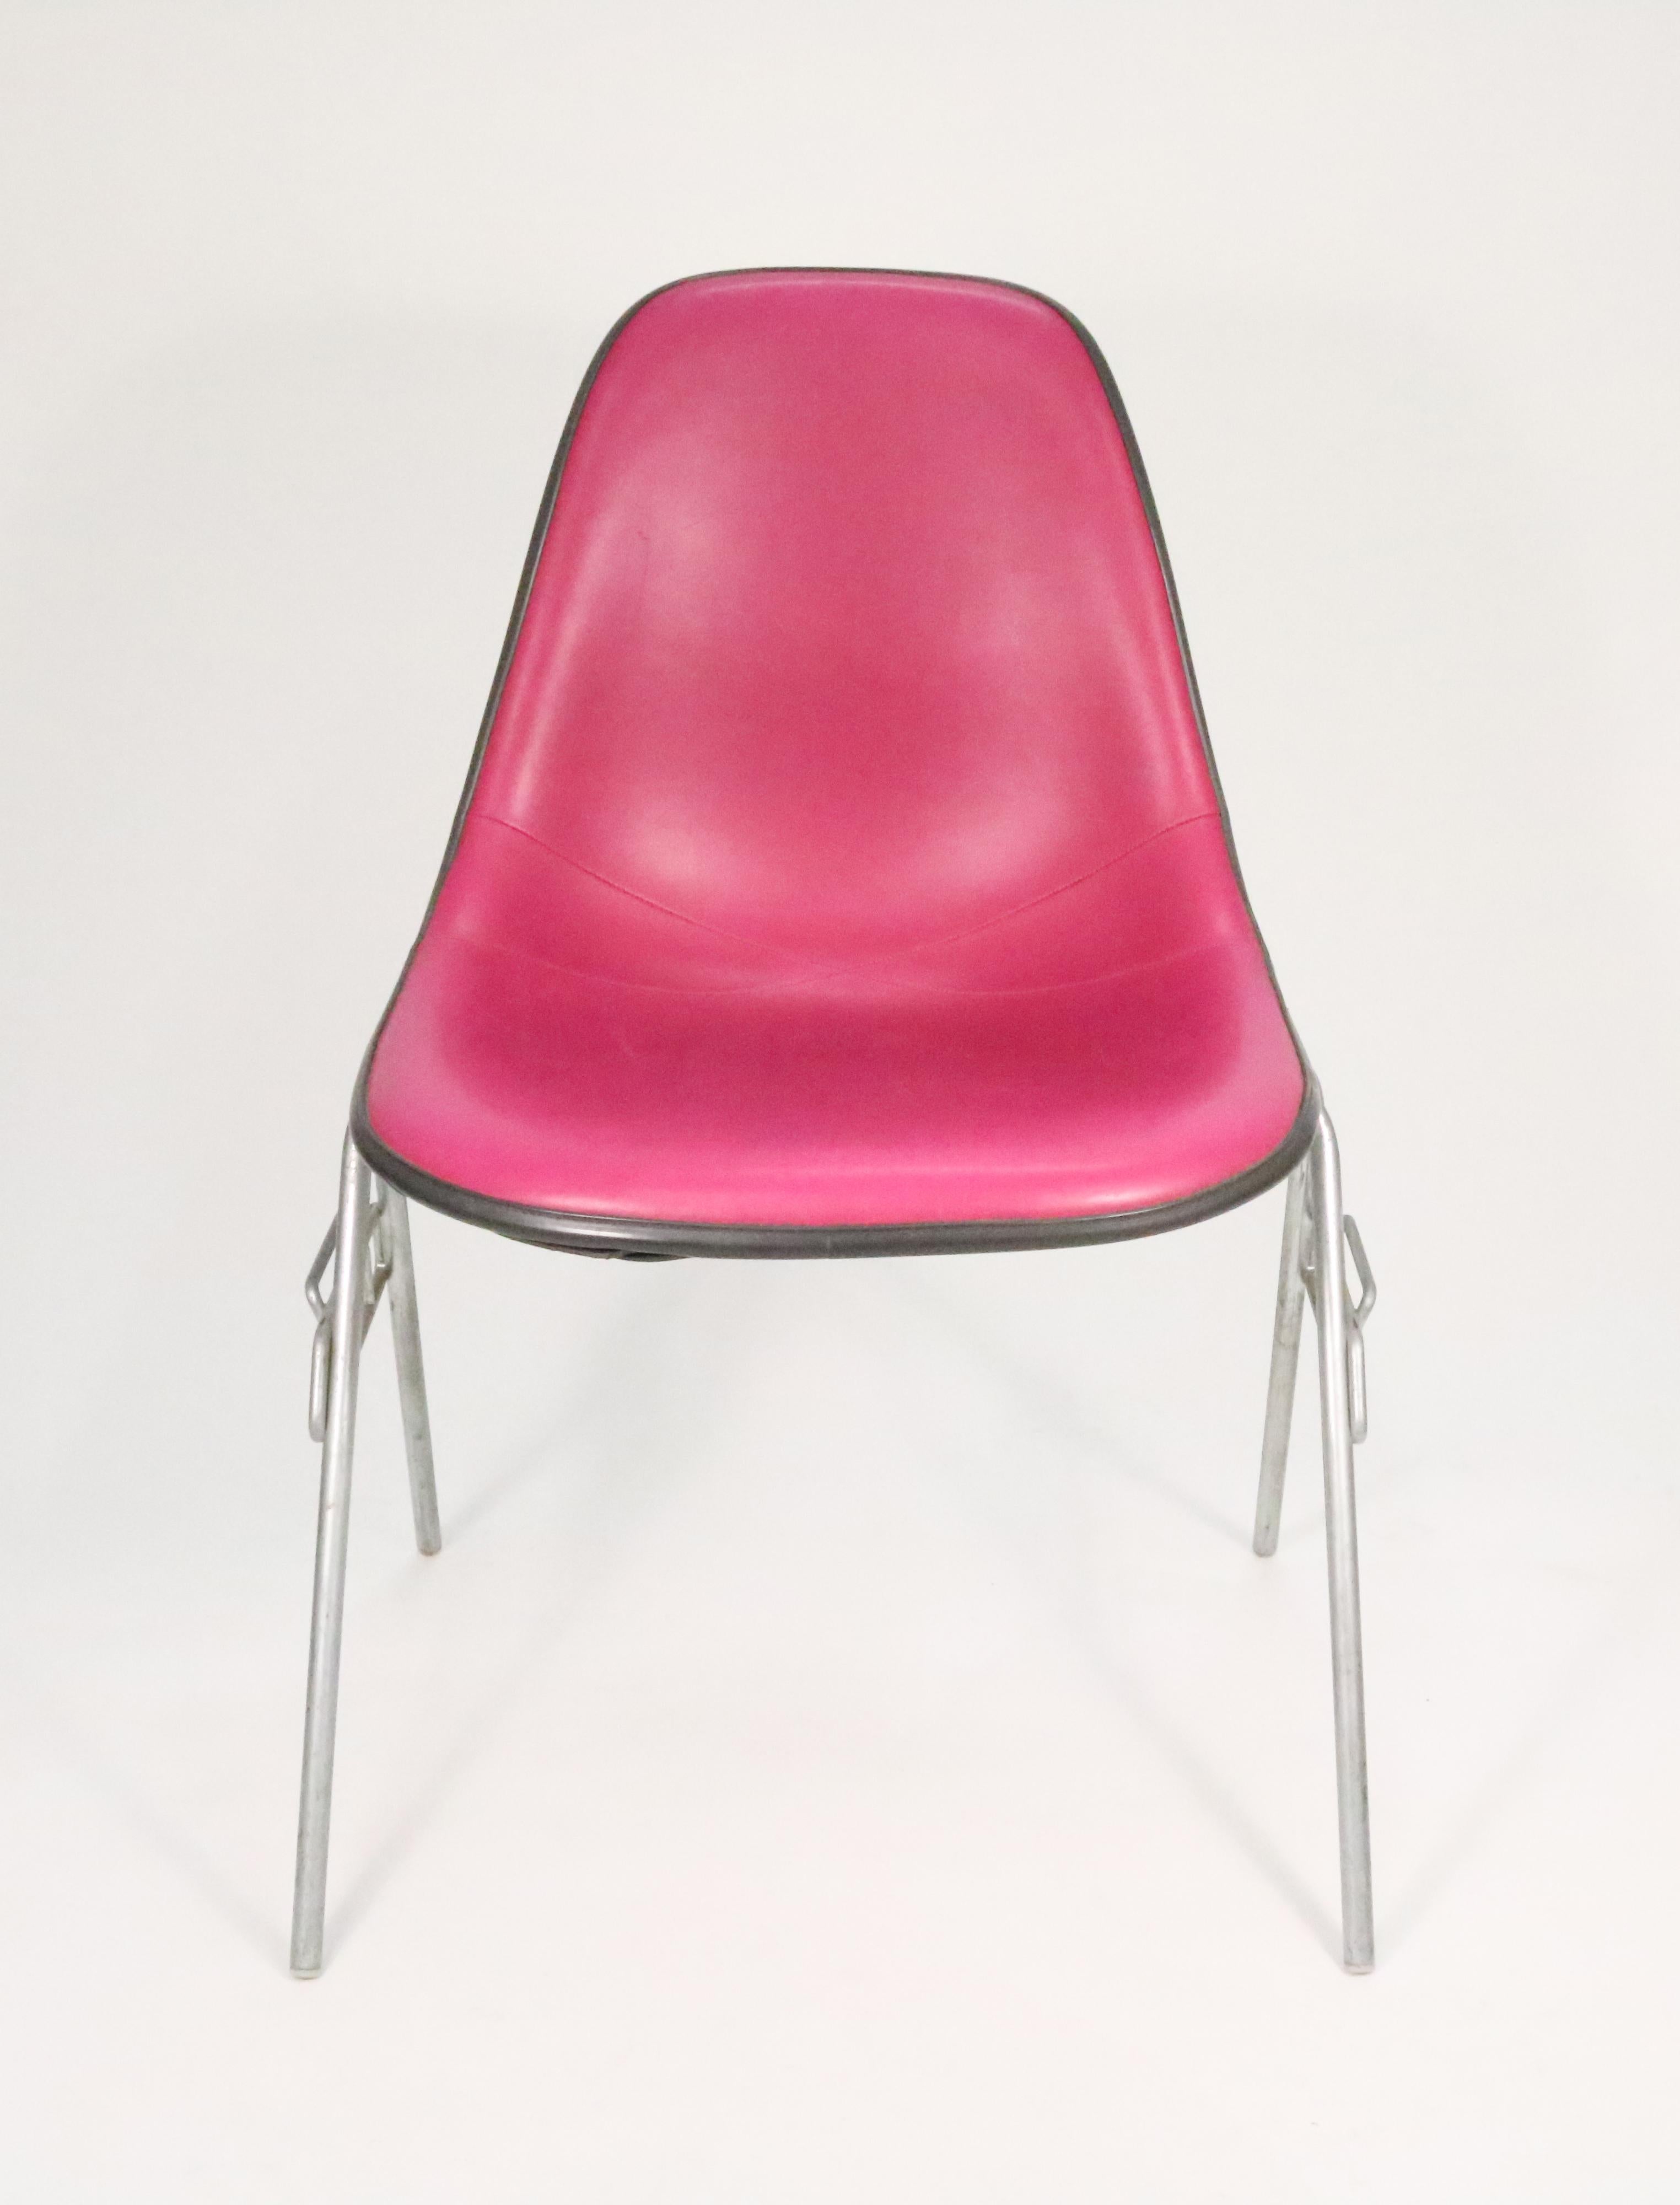 American Eames for Herman Miller Fiberglass Shell in Bright Pink Vinyl on Stackable Base